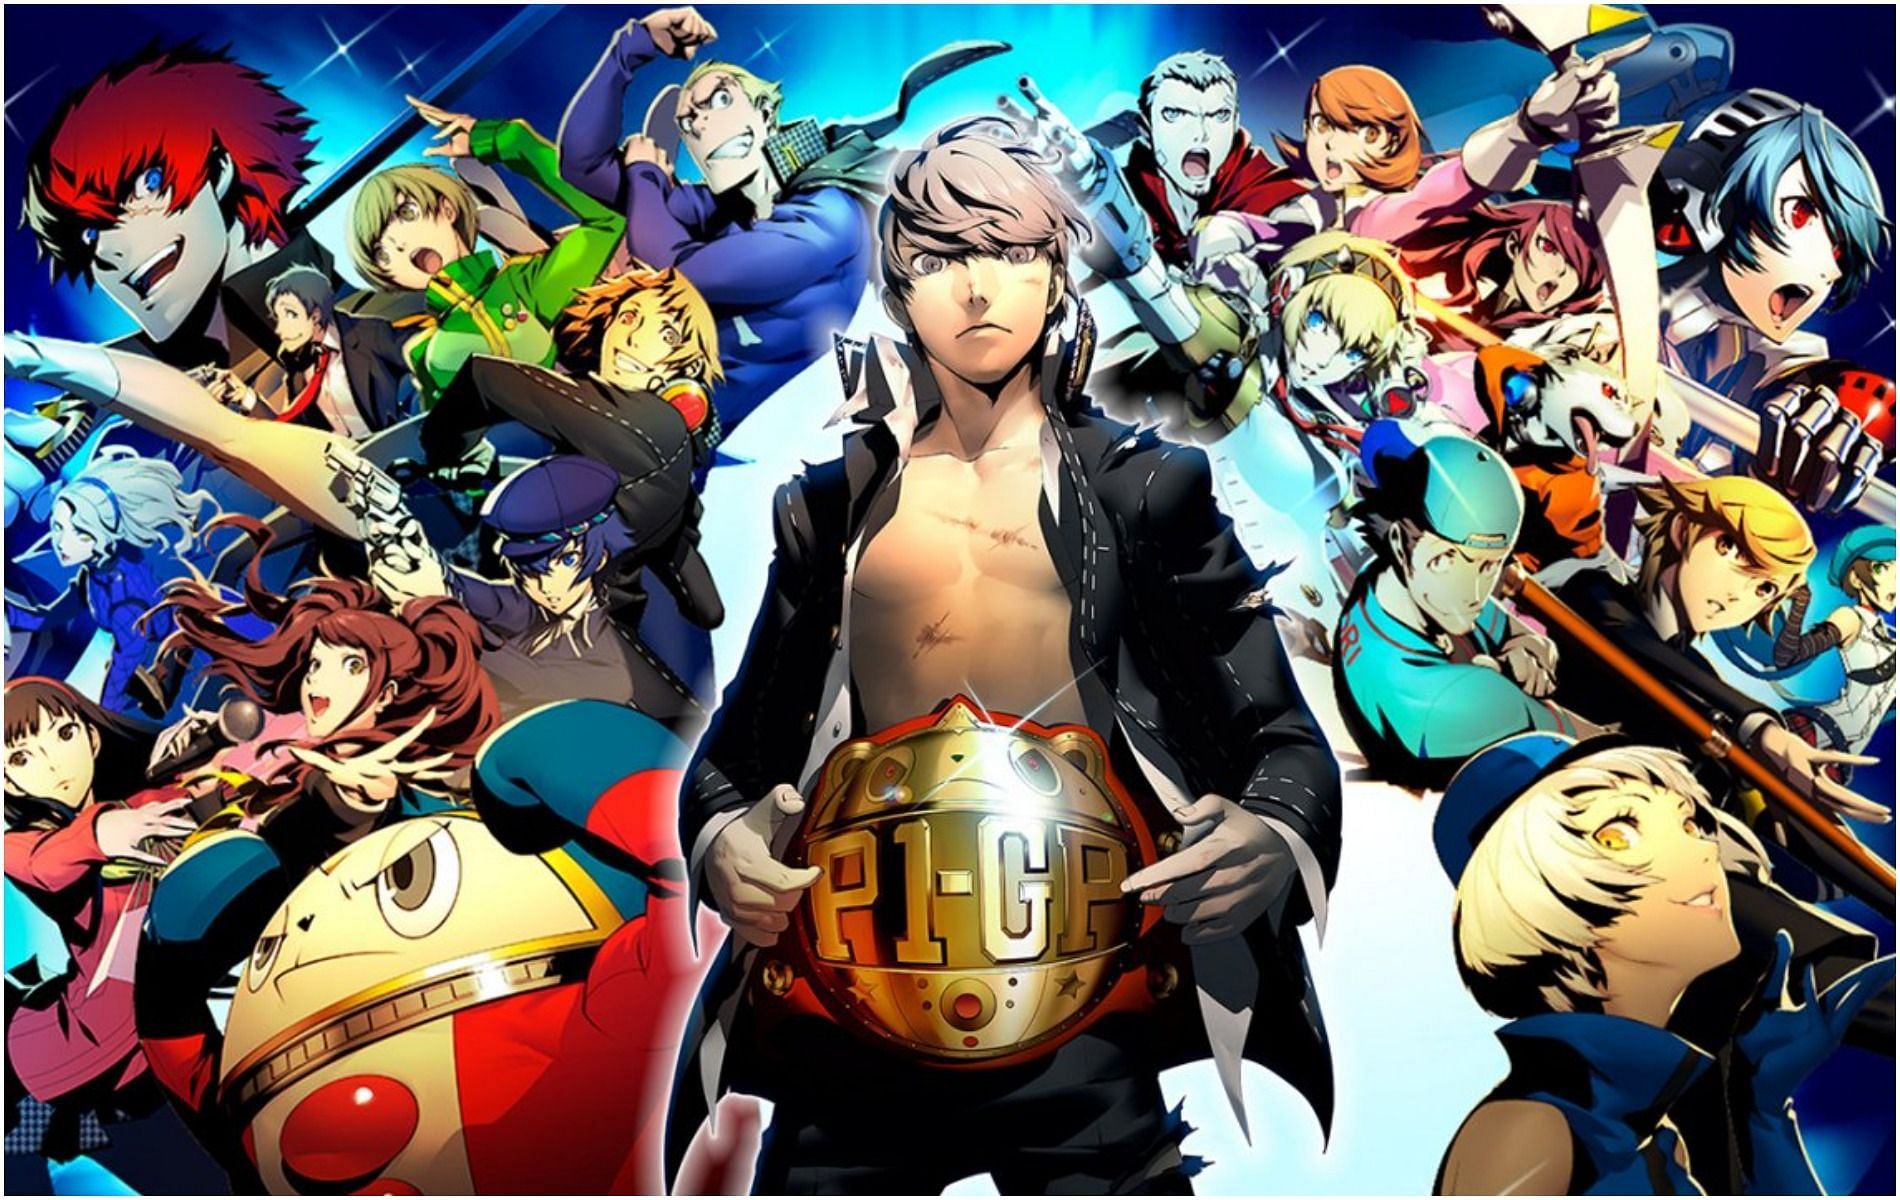 Persona 4 Arena Ultimax is almost here and serves as a sequel to the original game (Image via Atlus)